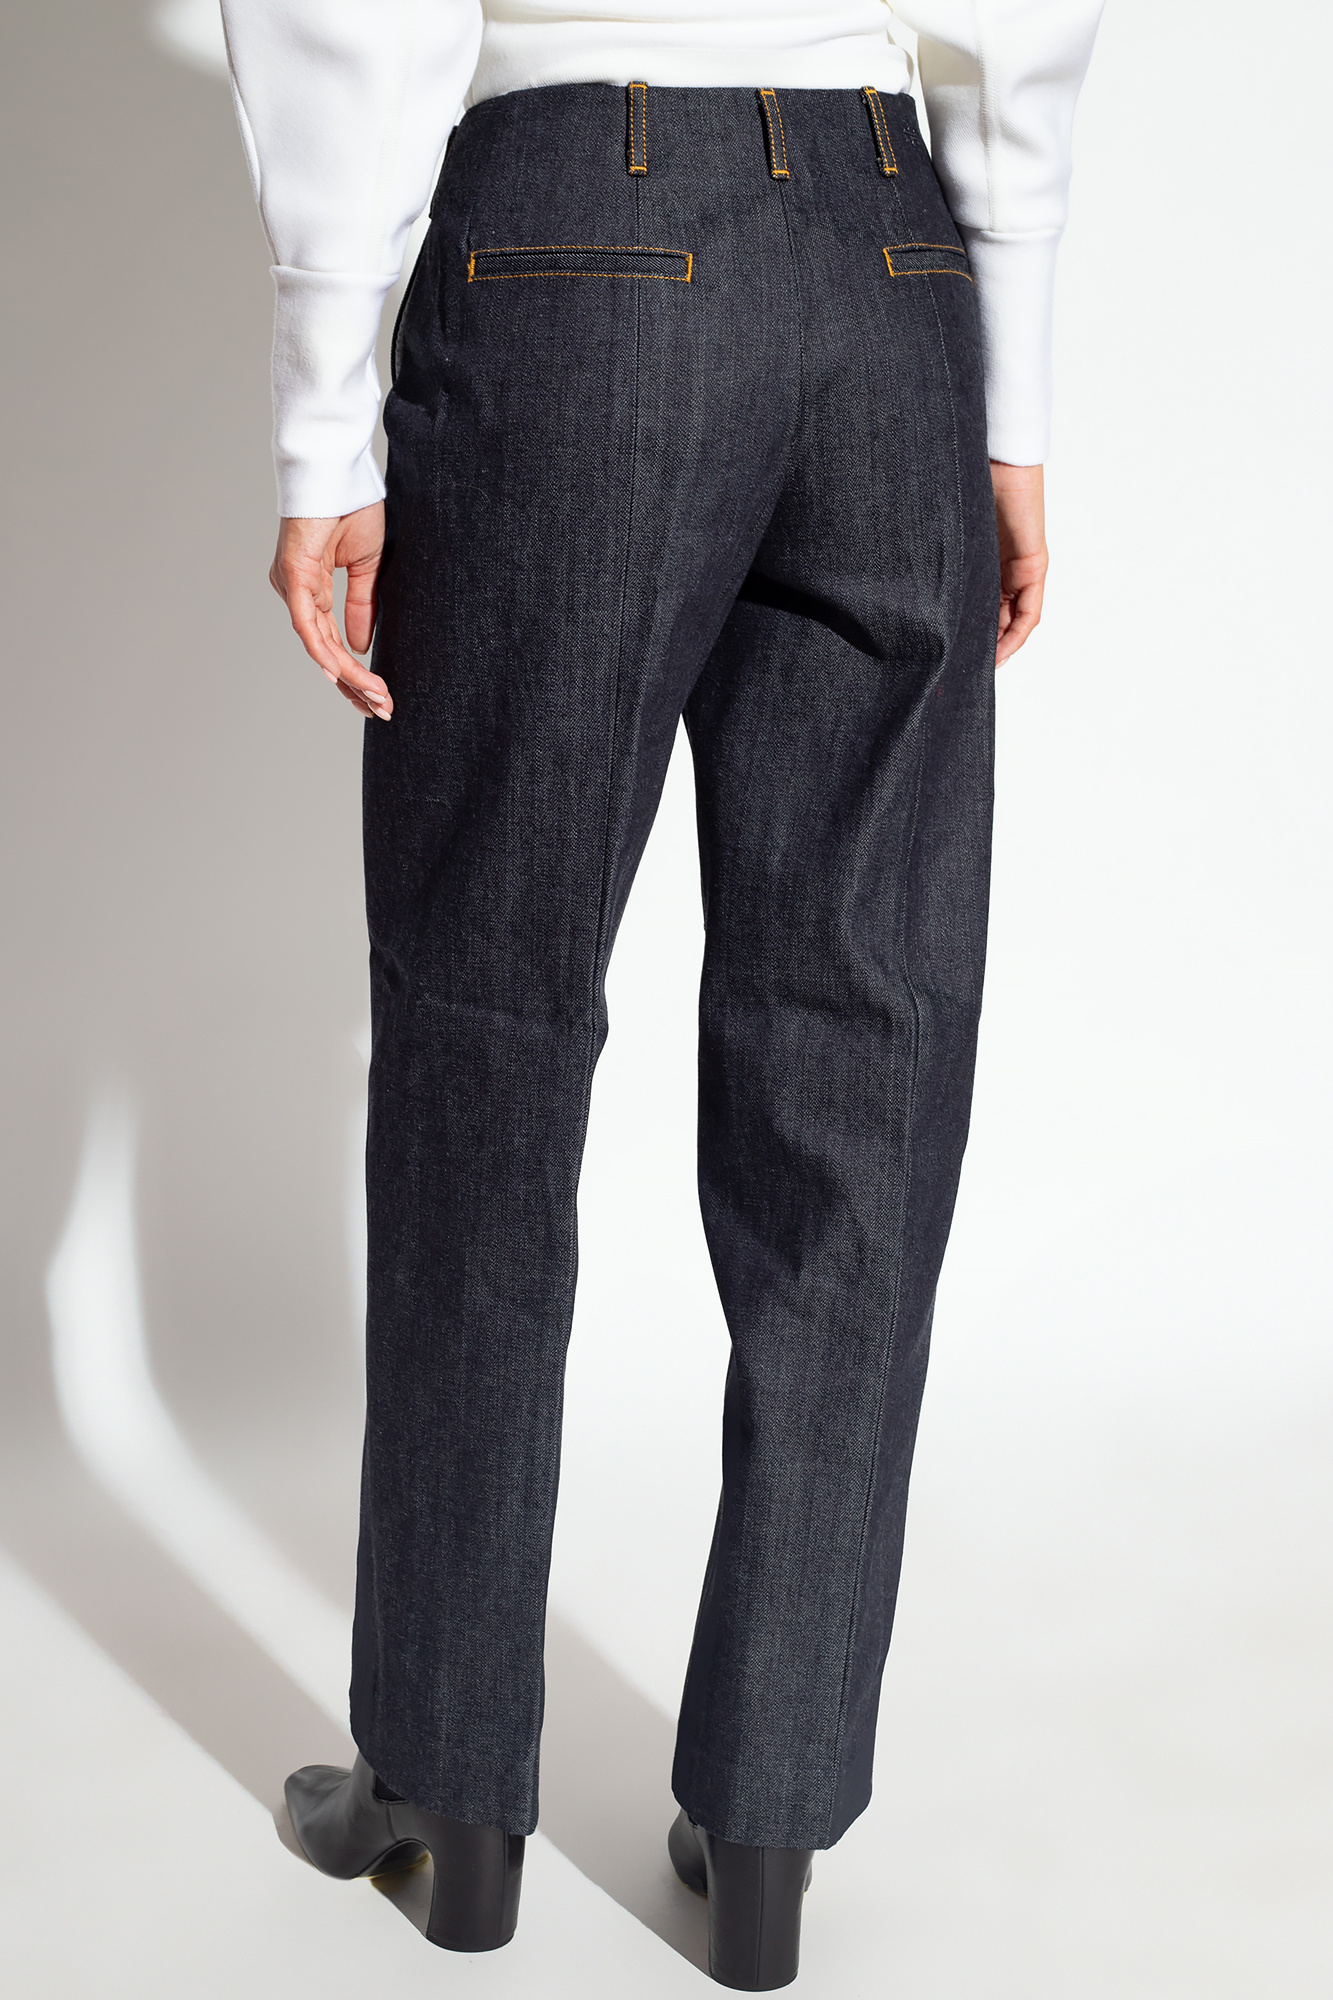 Tory Burch Tailored jeans